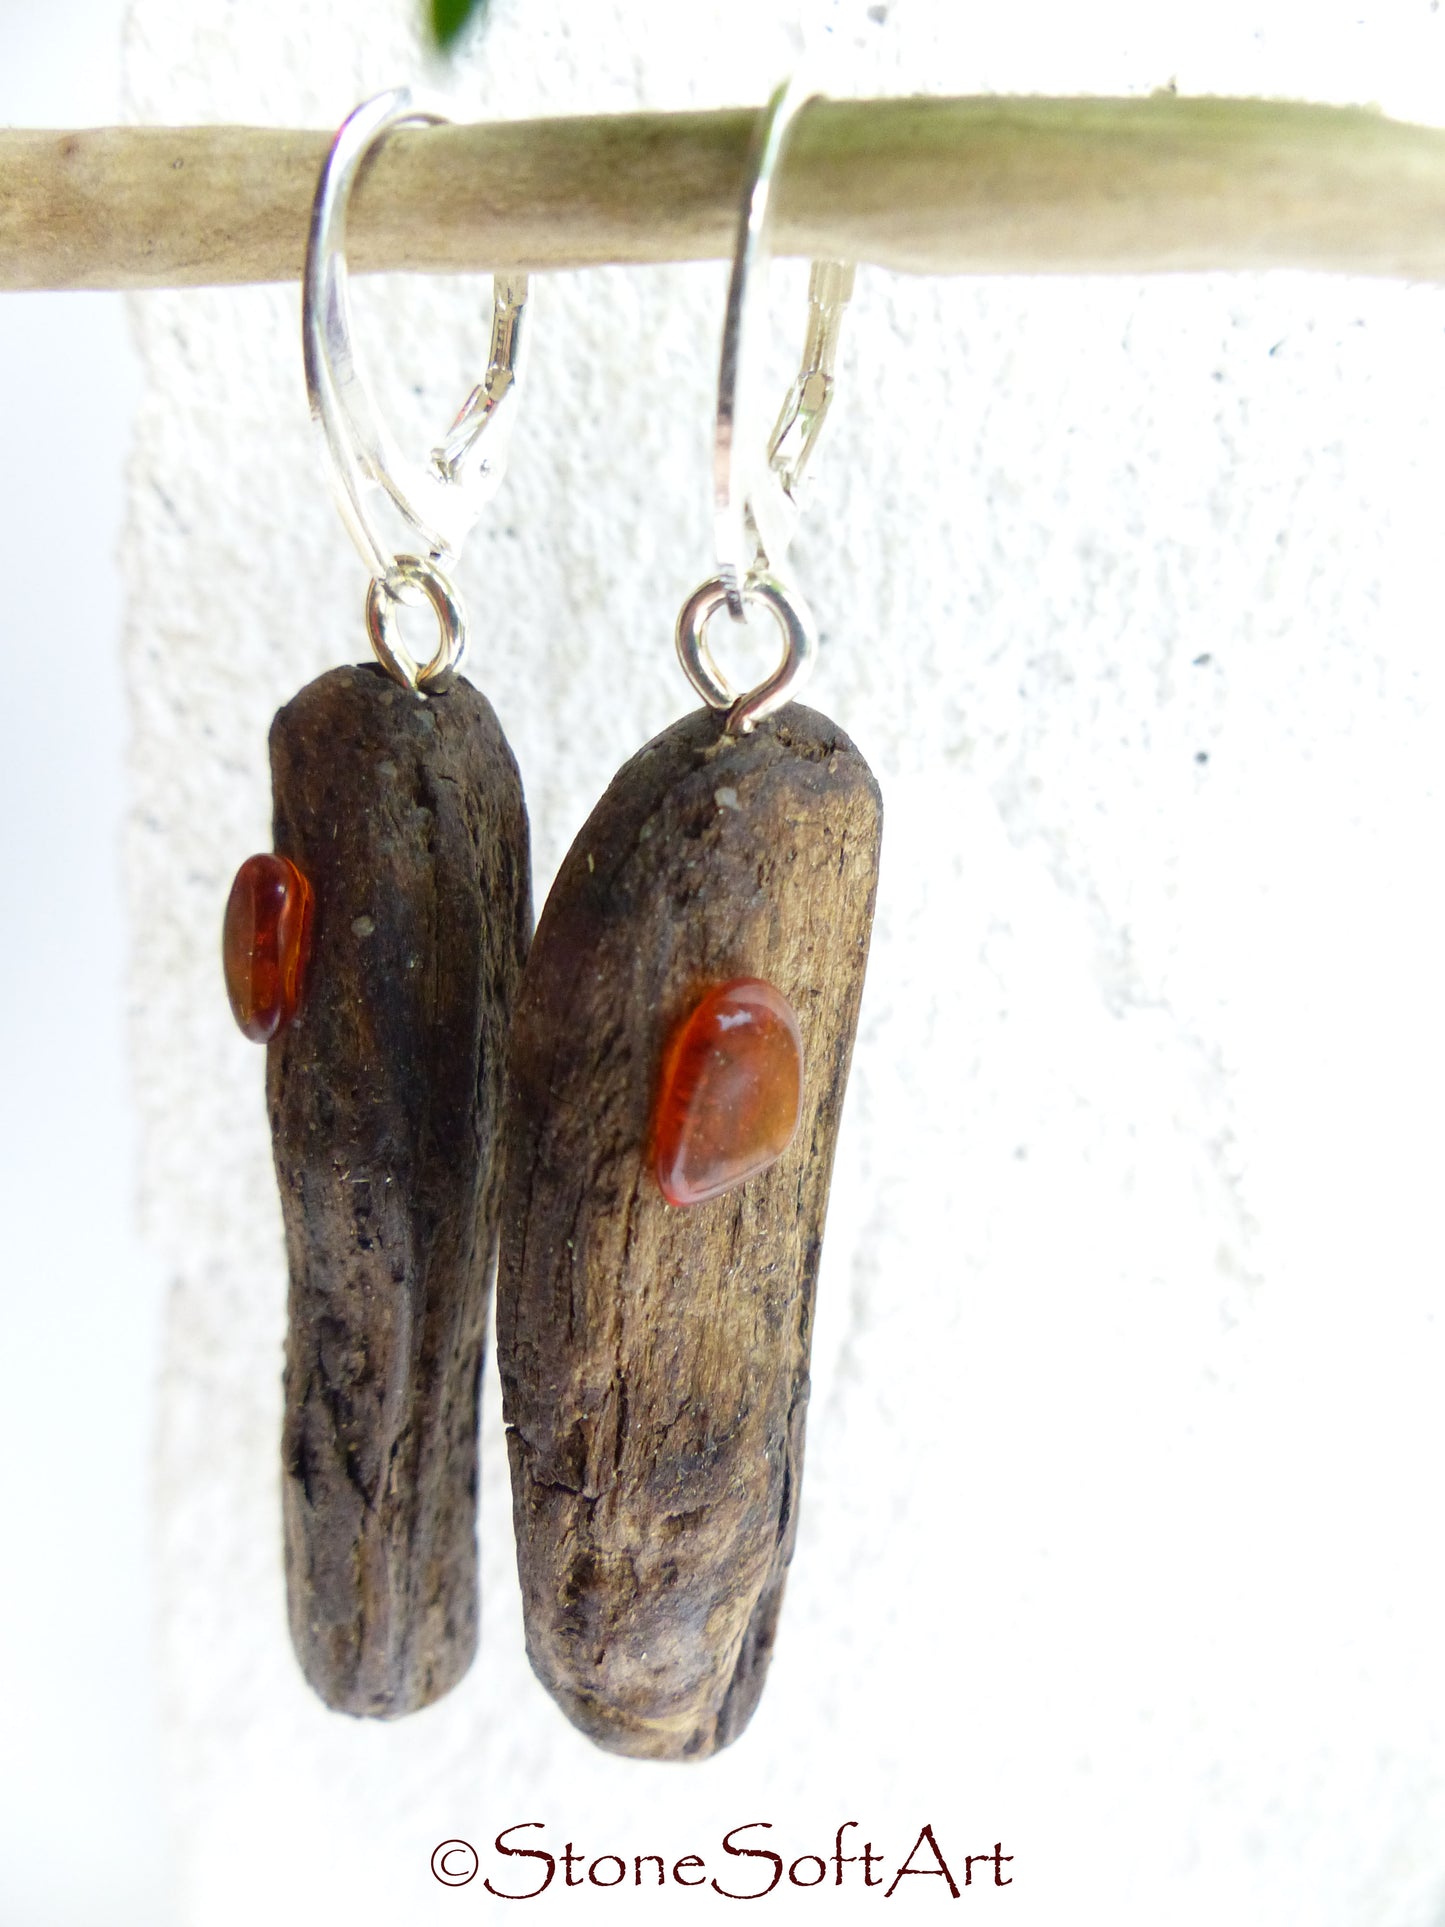 Driftwood Earrings SHANIA with Amber and 925 Silver, handmade eco friendly gift